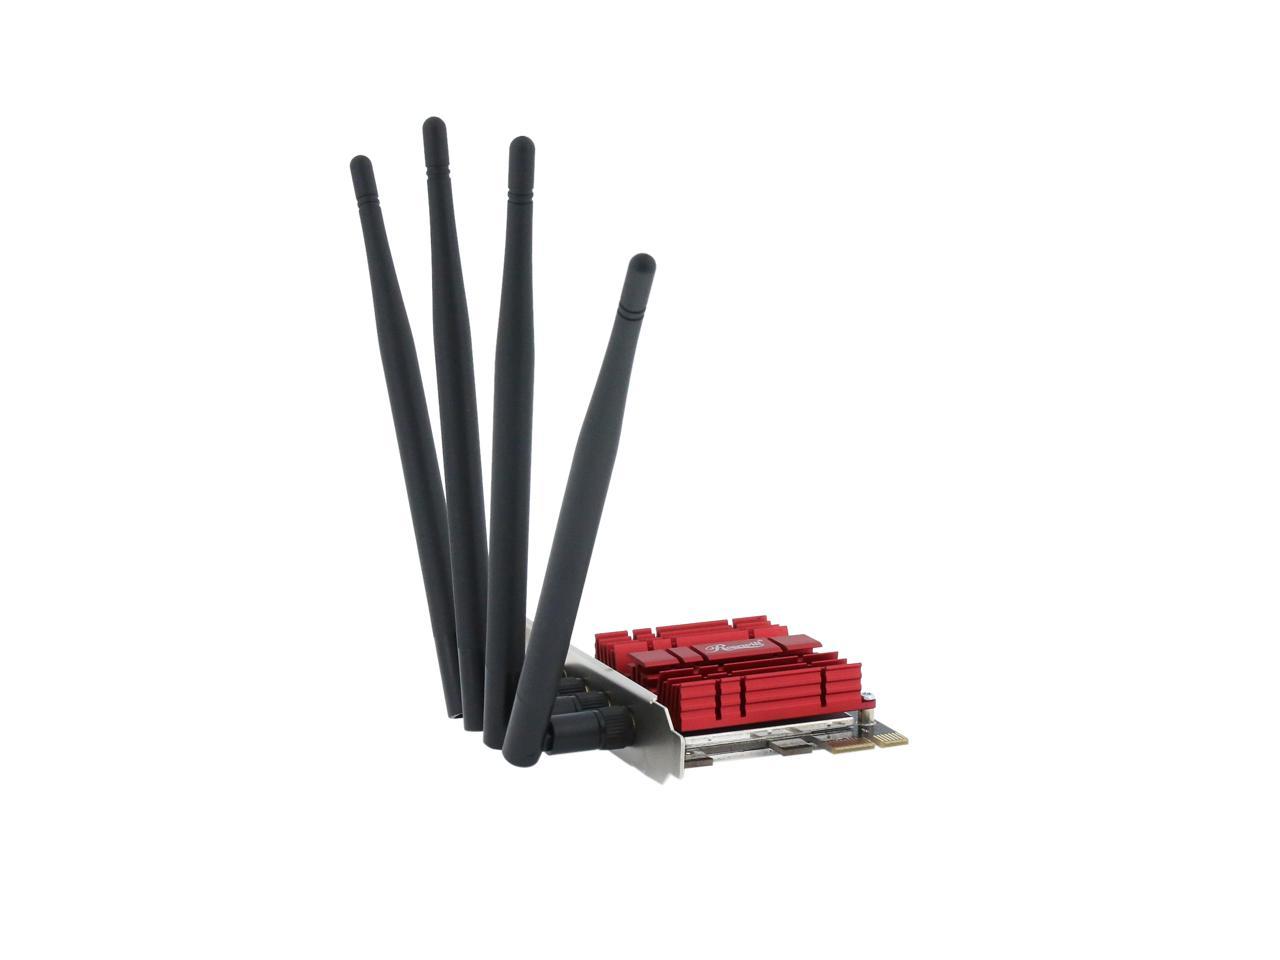 Rosewill RNX-AC1900PCEv2, Dual Band Wireless AC1900 Wi-Fi Adapter for